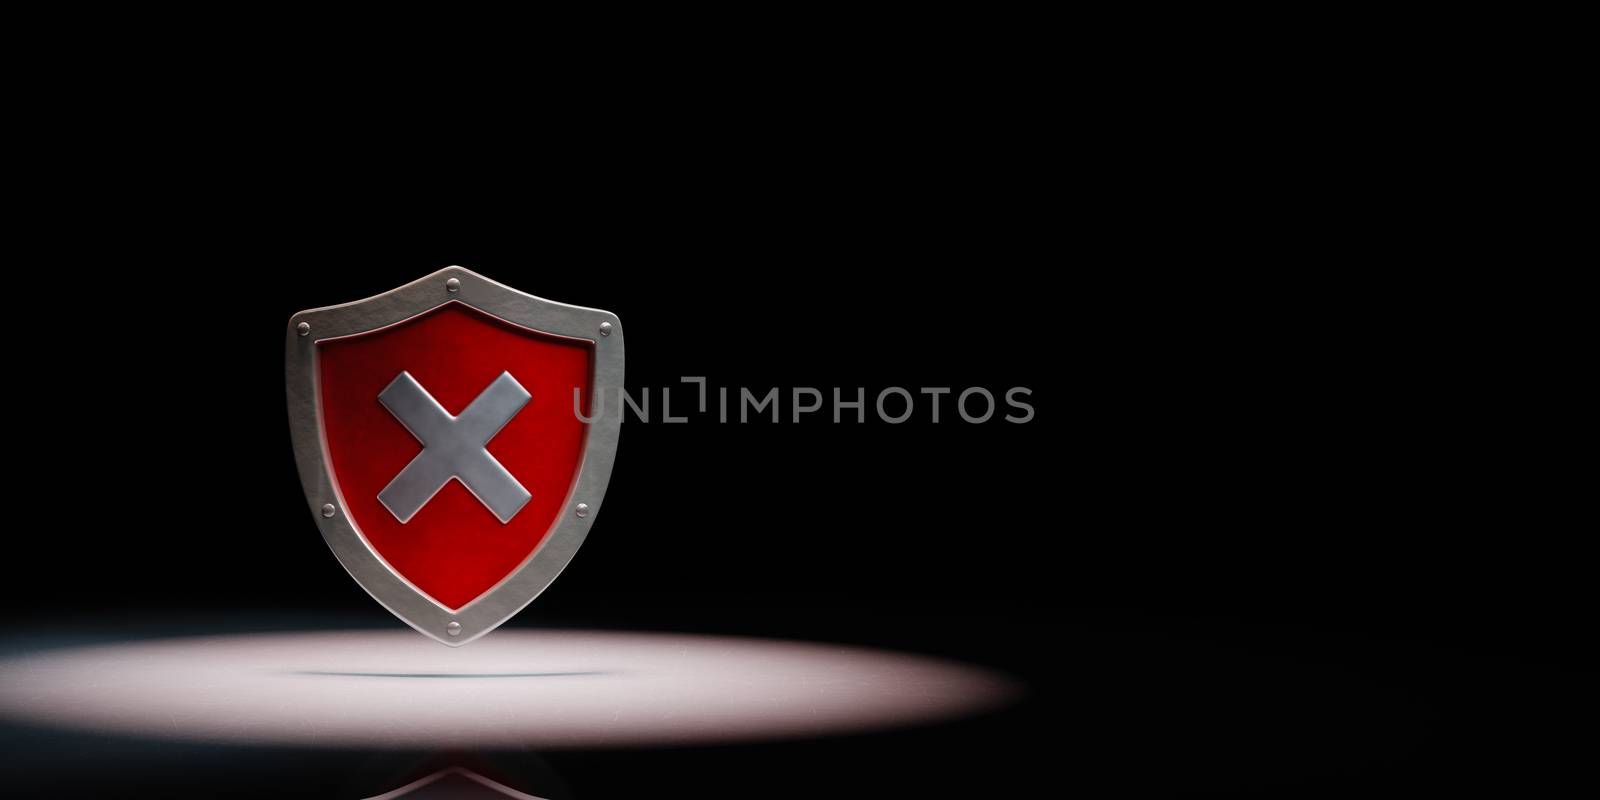 Metallic Shield Shape with Cross Spotlighted on Black Background by make